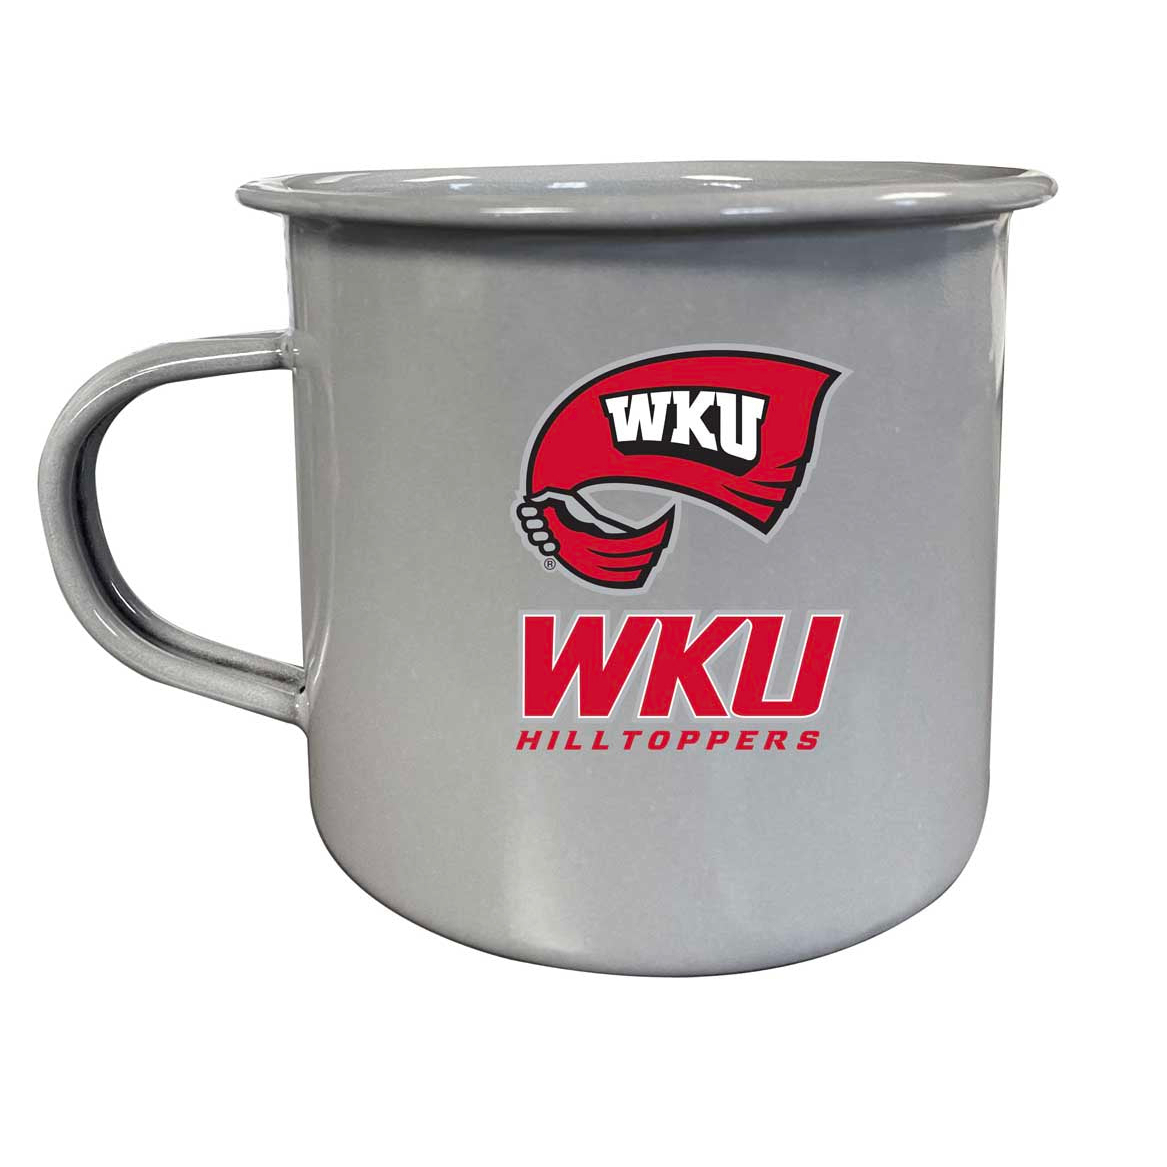 Western Kentucky Hilltoppers Tin Camper Coffee Mug - Choose Your Color - Gray